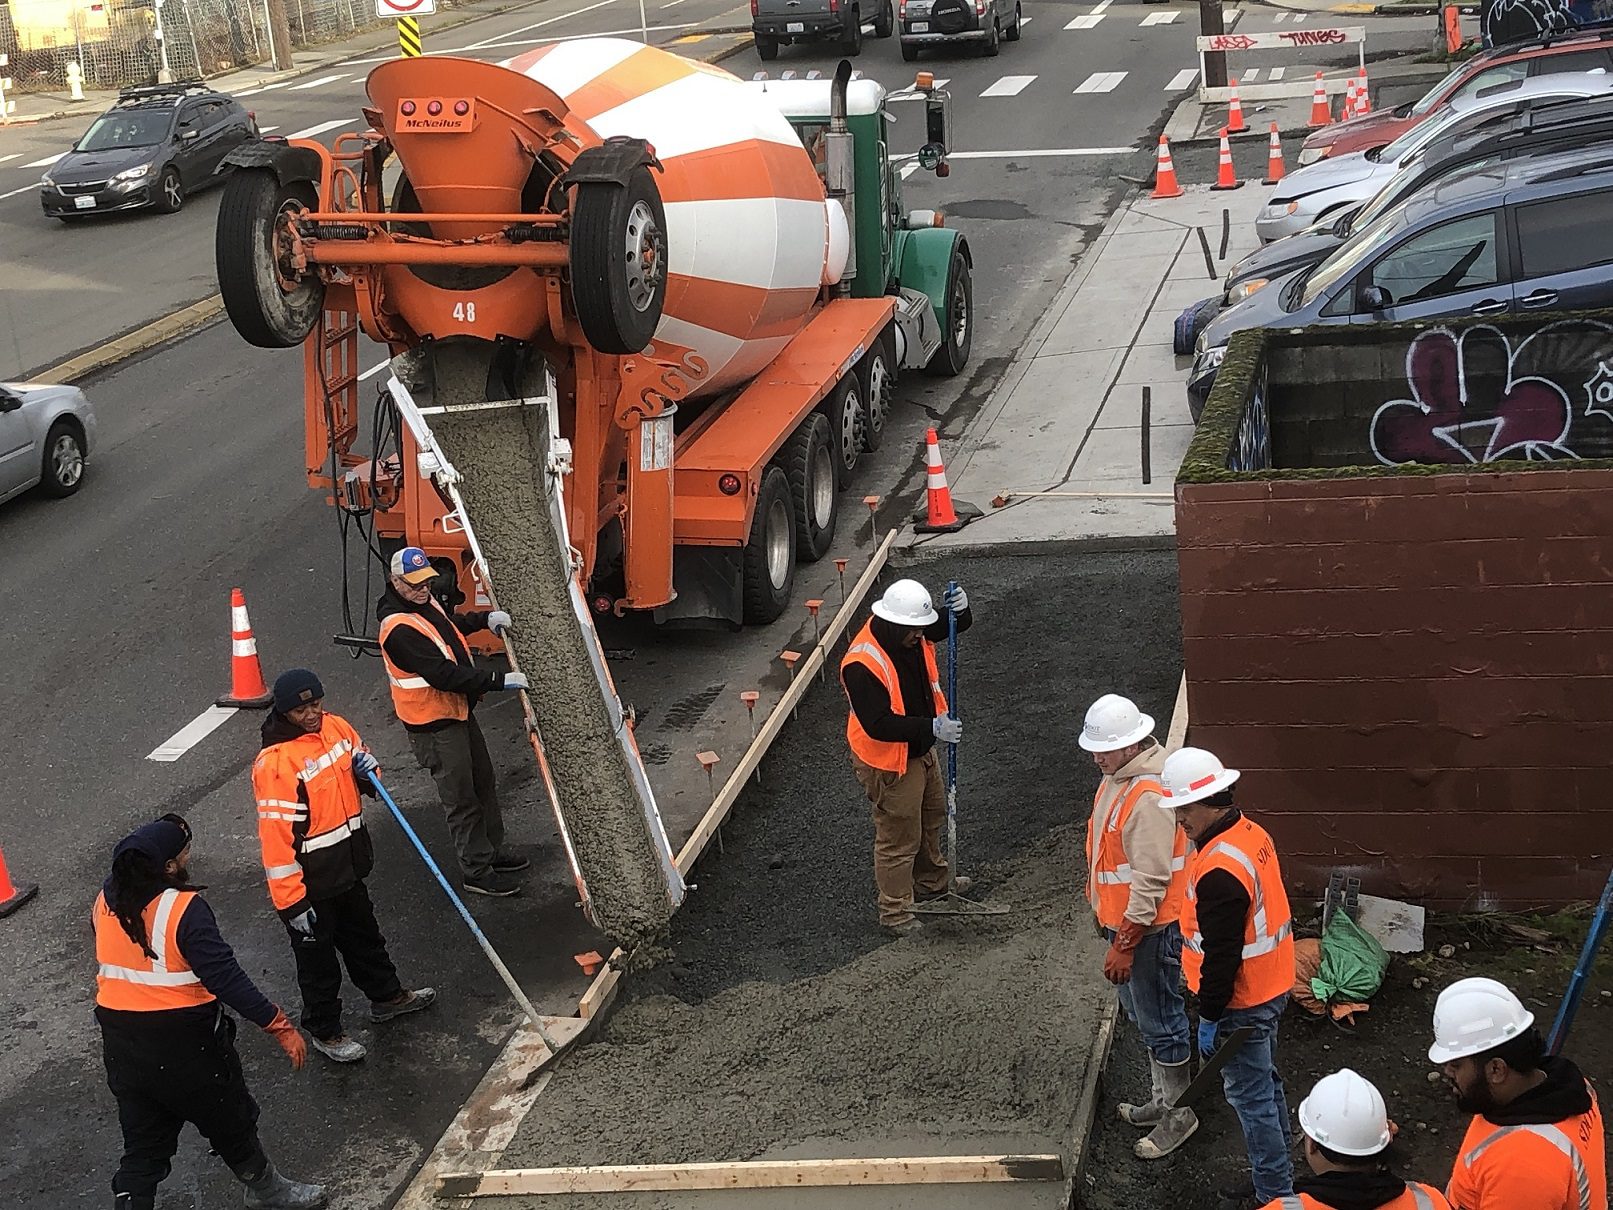 Eight people wearing orange vests work to pour concrete on a section of sidewalk next to the street. A large cement mixer truck is in the upper left, and a worker spreads the mix out for placement. Parked cars and orange cones are also in the picture.